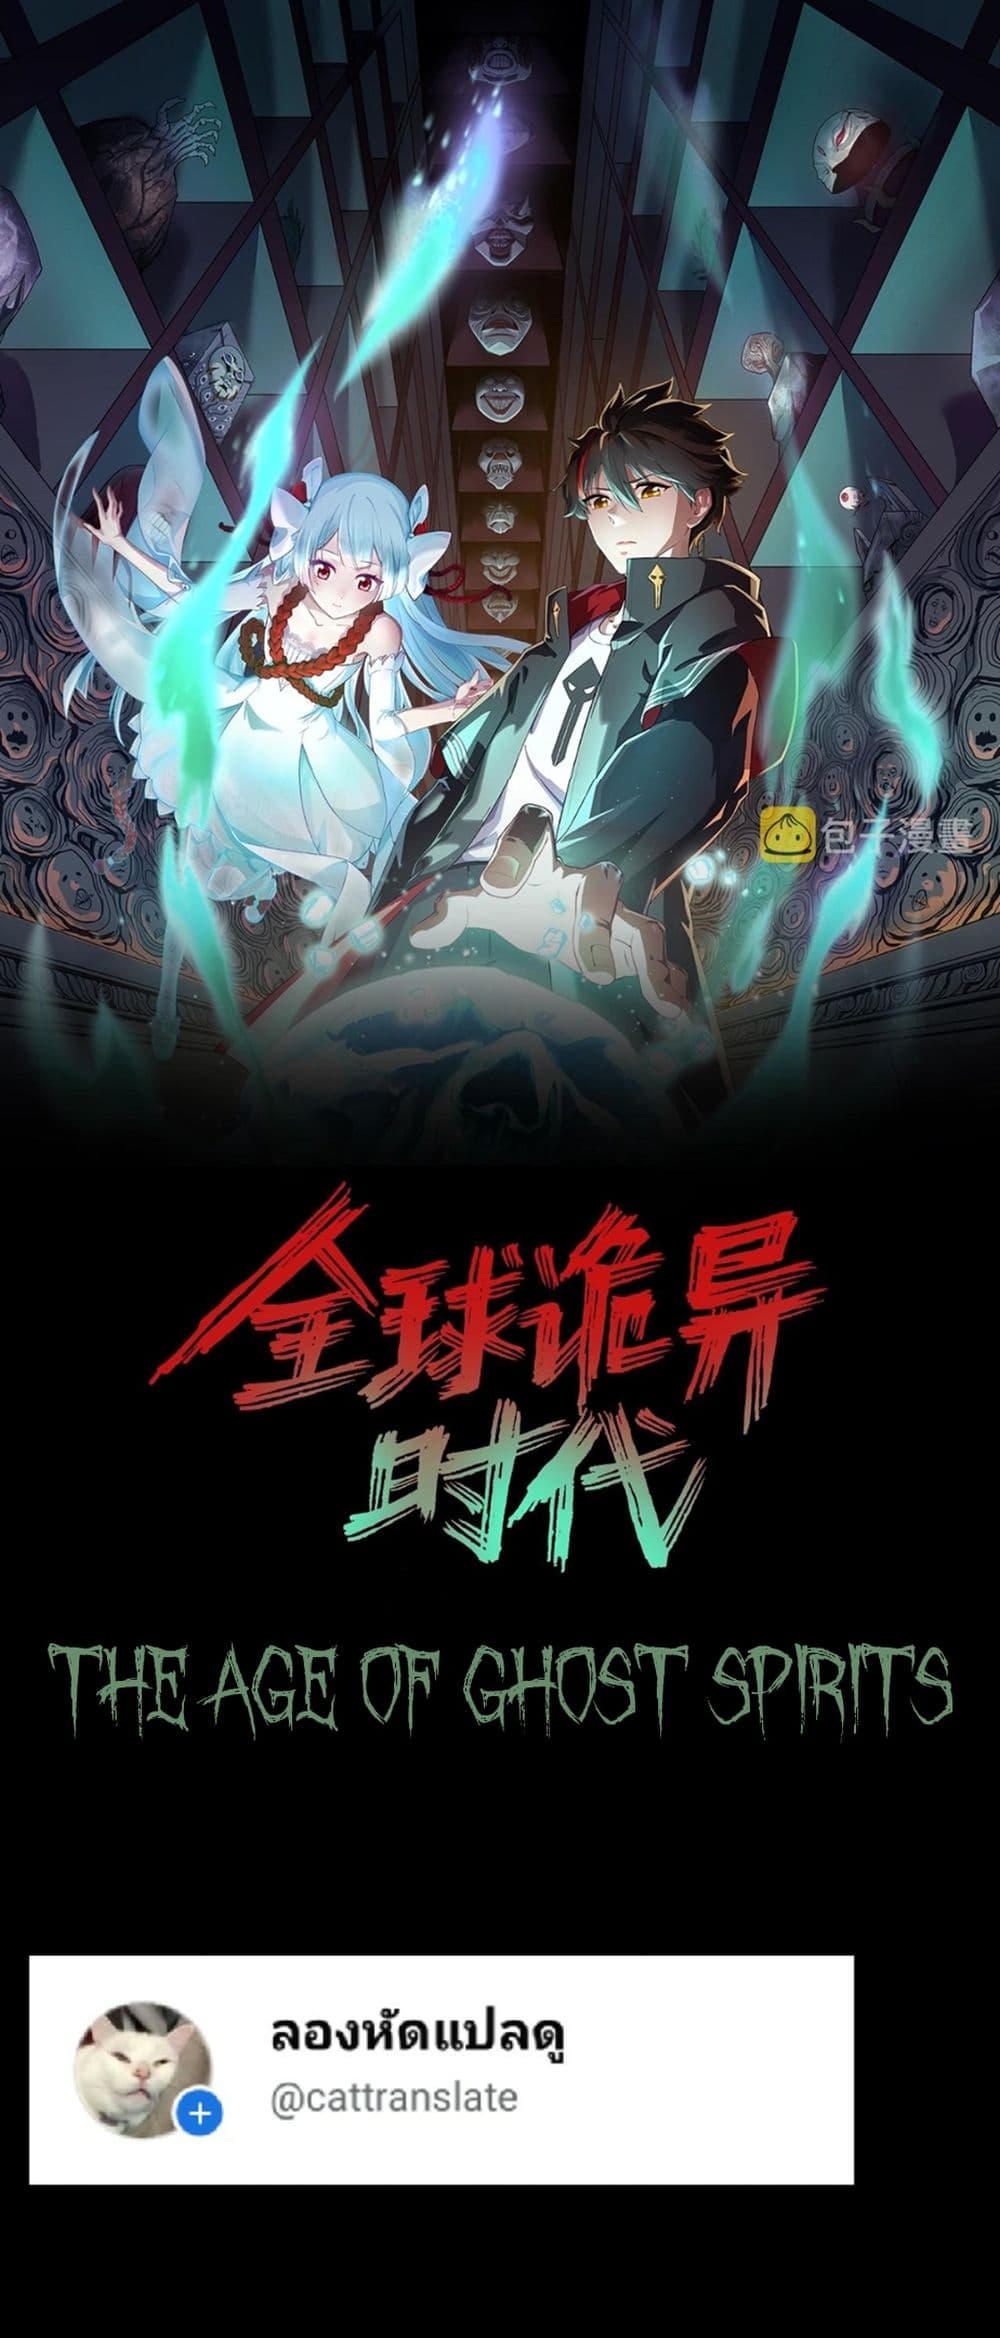 The Age of Ghost Spirits à¸à¸­à¸à¸à¸µà¹ 50 (1)